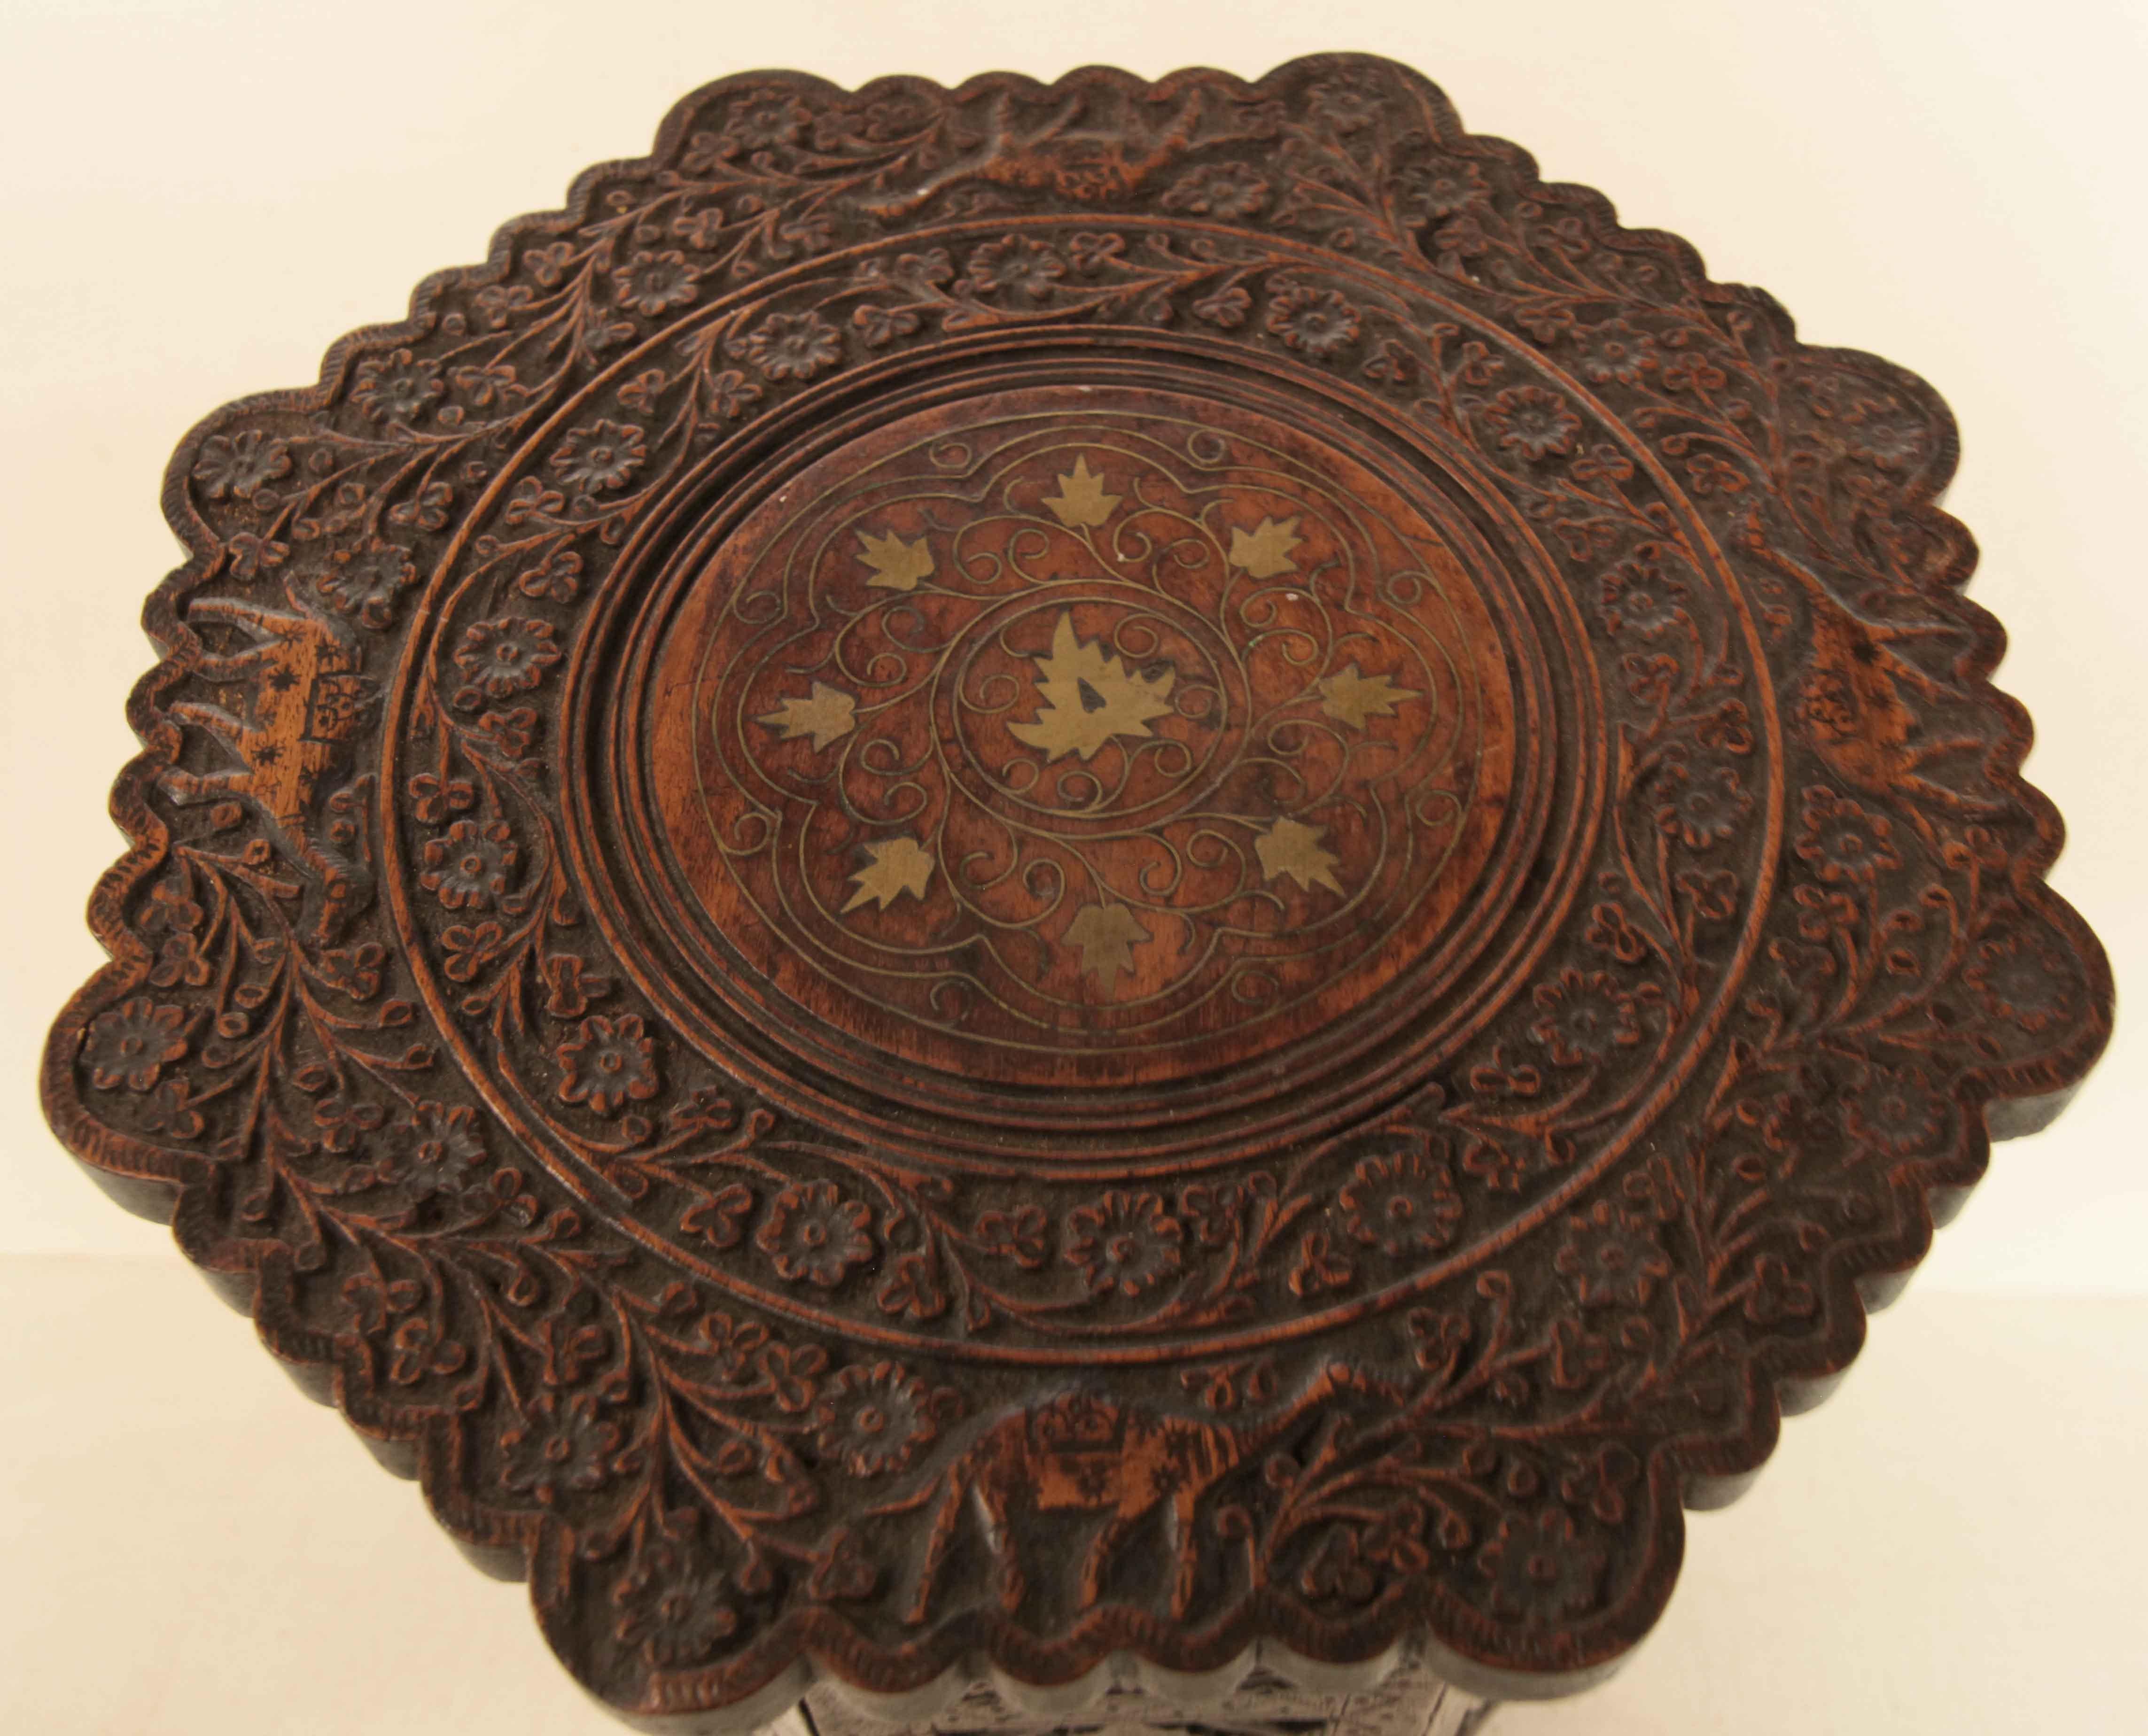 Octagonal Moraccan carved side table, the top has a scalloped shaped edge with a border of flowers and scrolling foliage along with camels, the center features a circle of inlaid brass flowers and arabesques. .  The hinged base has eight identical